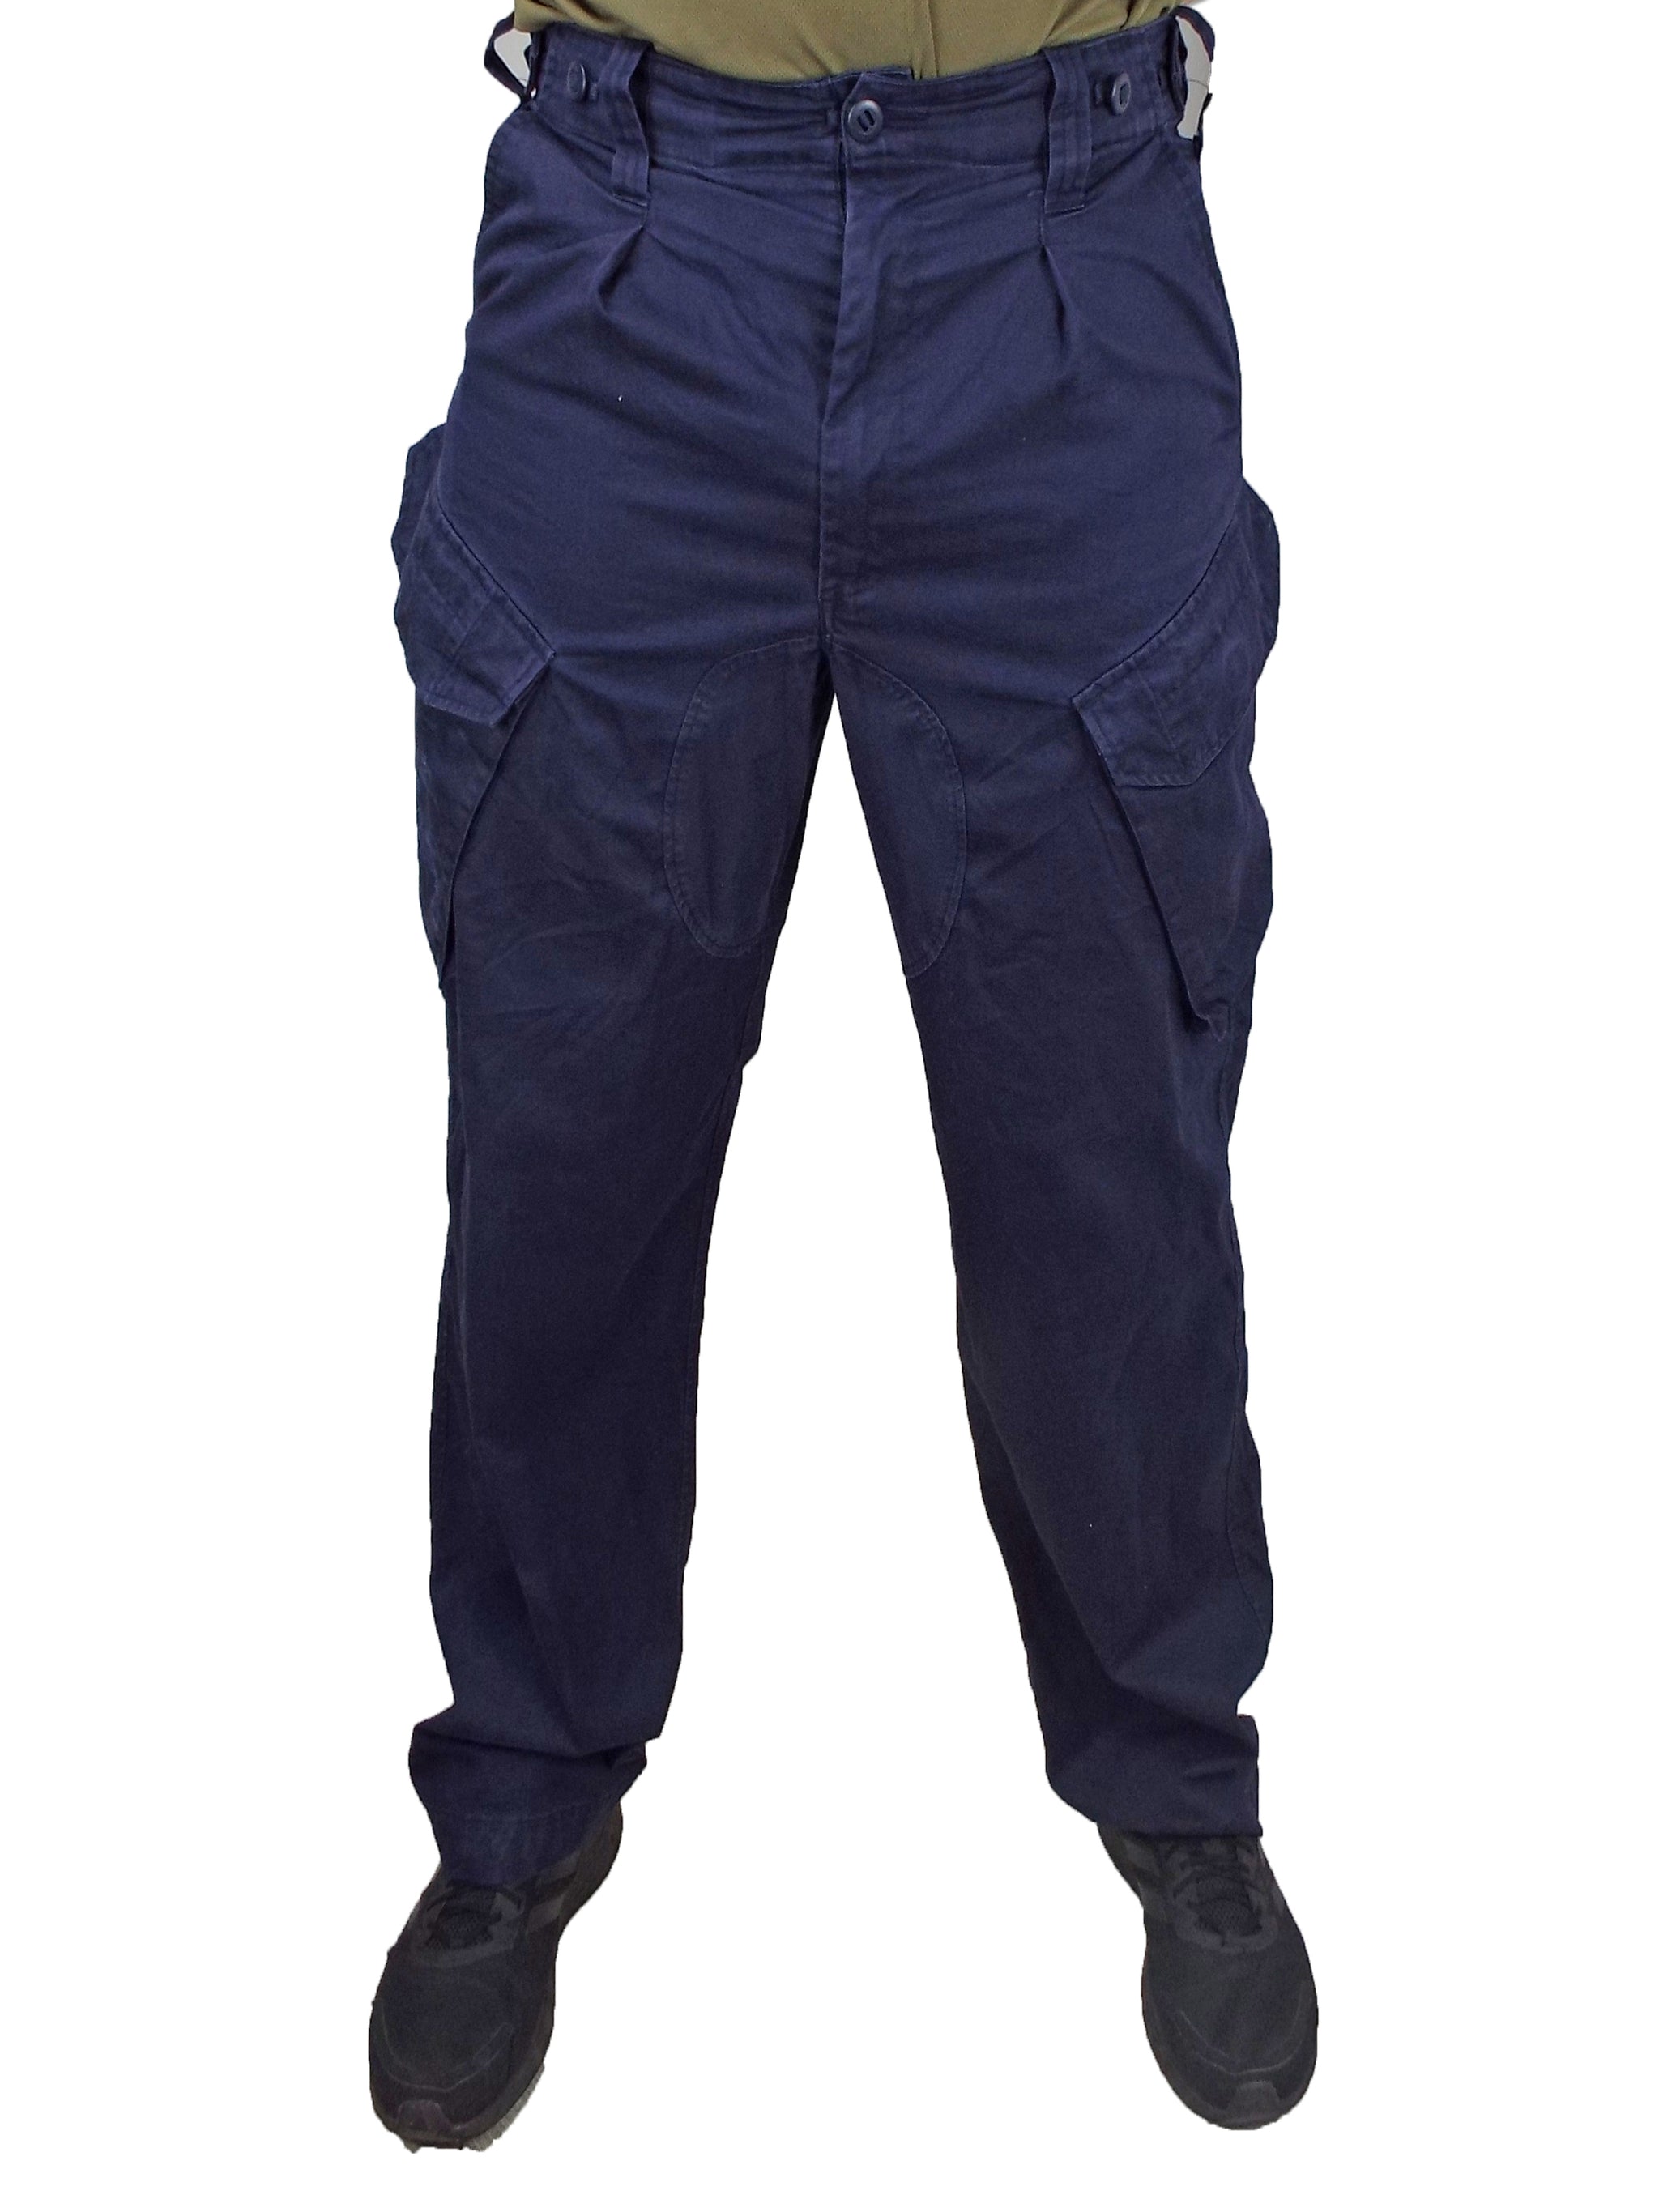 ROYAL NAVY TROUSERS COMBAT NAVY BLUE ONE WASH  andPheb Staff Blog